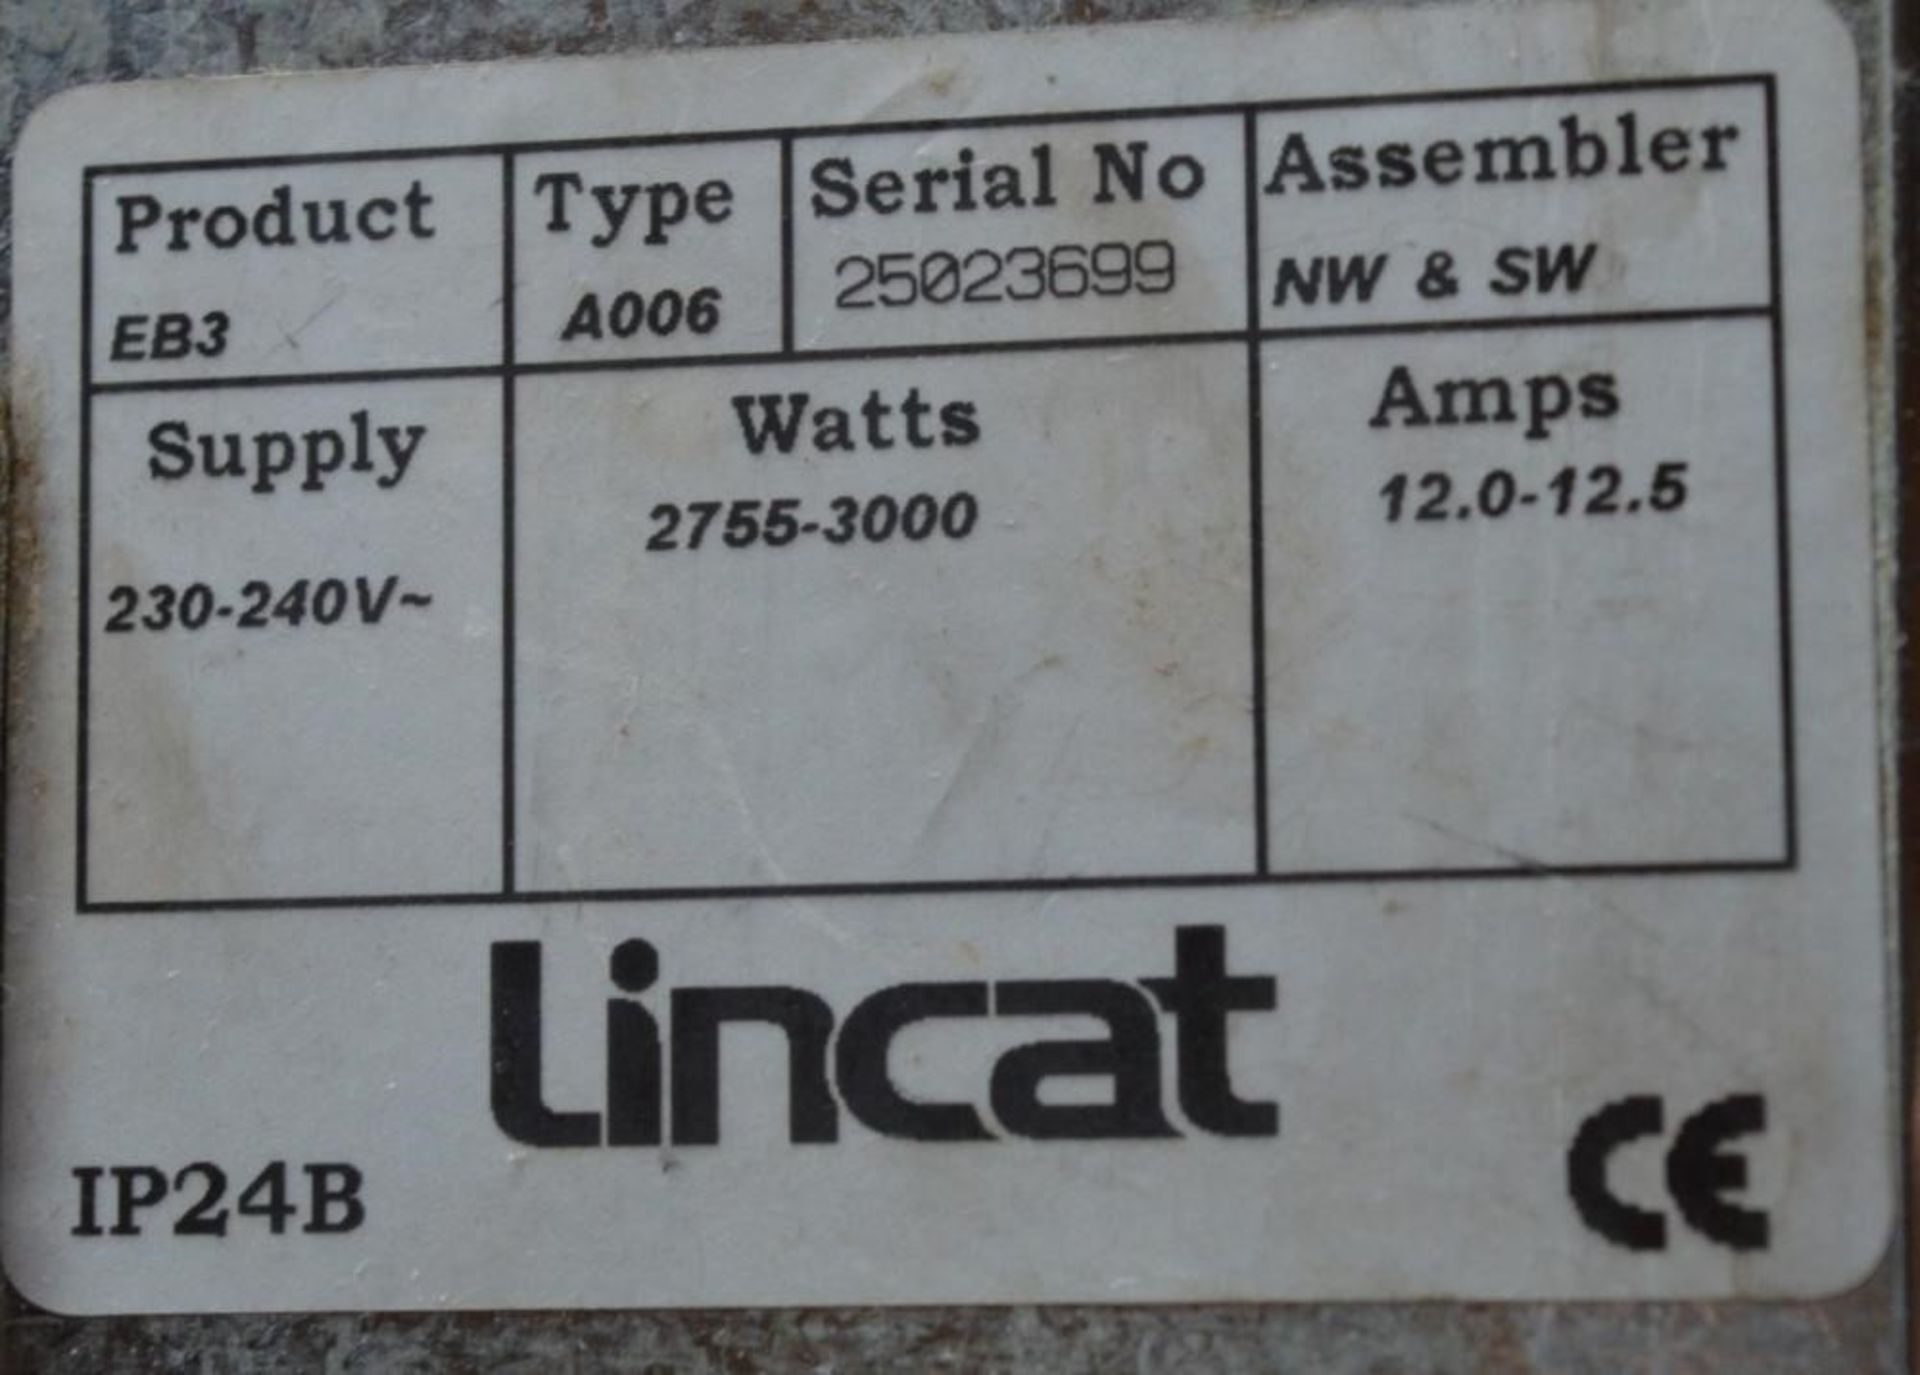 1 x Lincat EB3 Counter Top Water Boiler - H65 x W30 x D47 cms - Stainless Steel Finish - 3000w 240v - Image 3 of 3